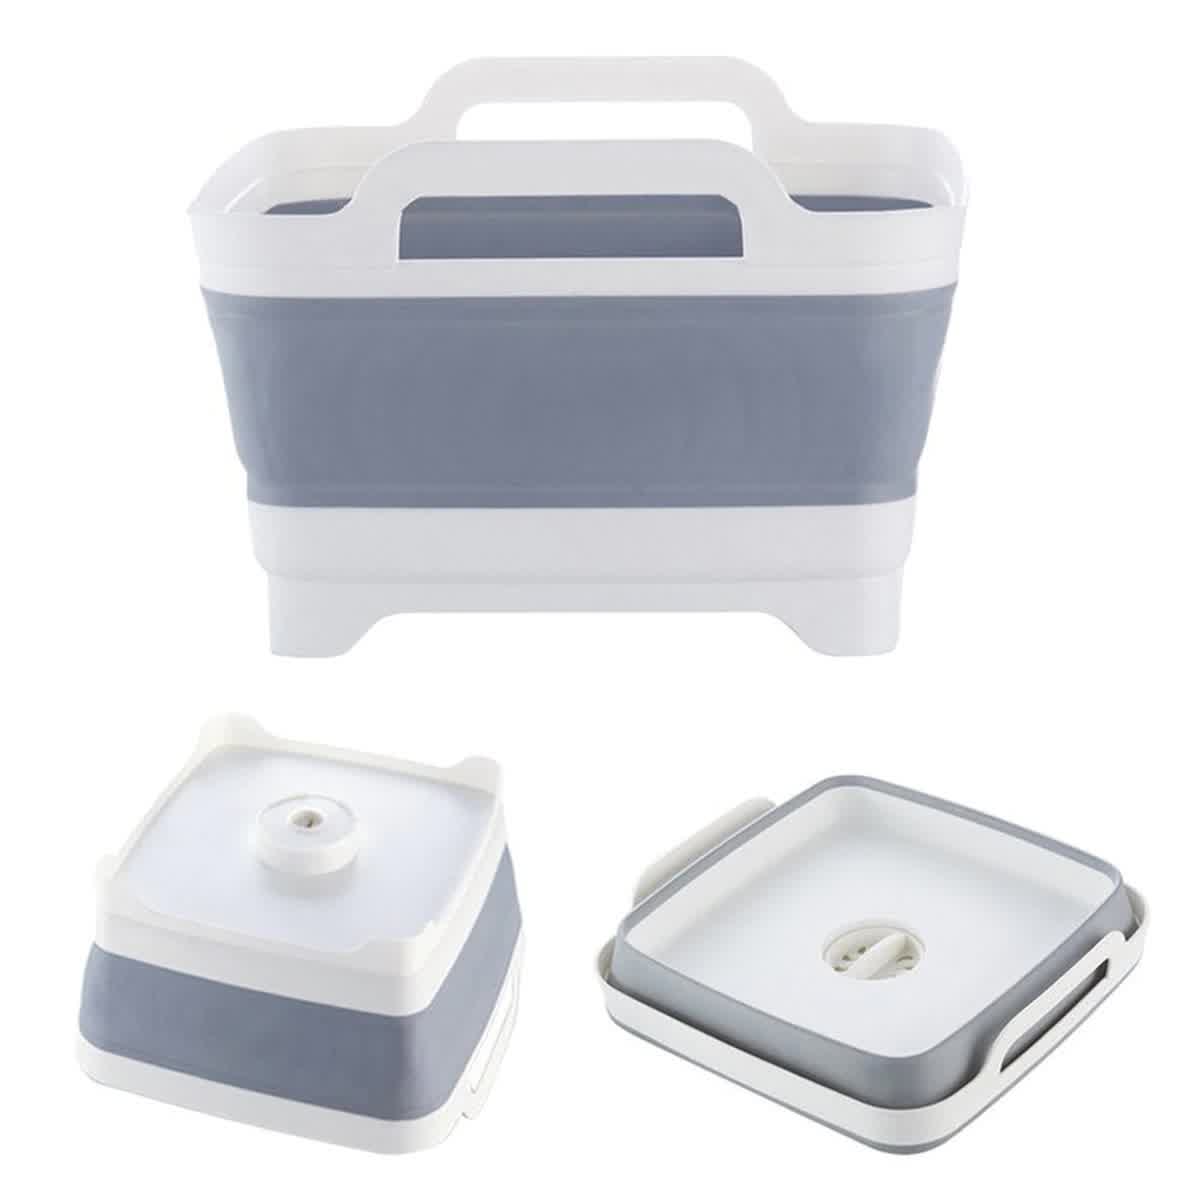 Folding Wash Basin Silicone Dish Tub Collapsible with Drain Plug Carry Handles Washing Basin Drainer Sink Colander